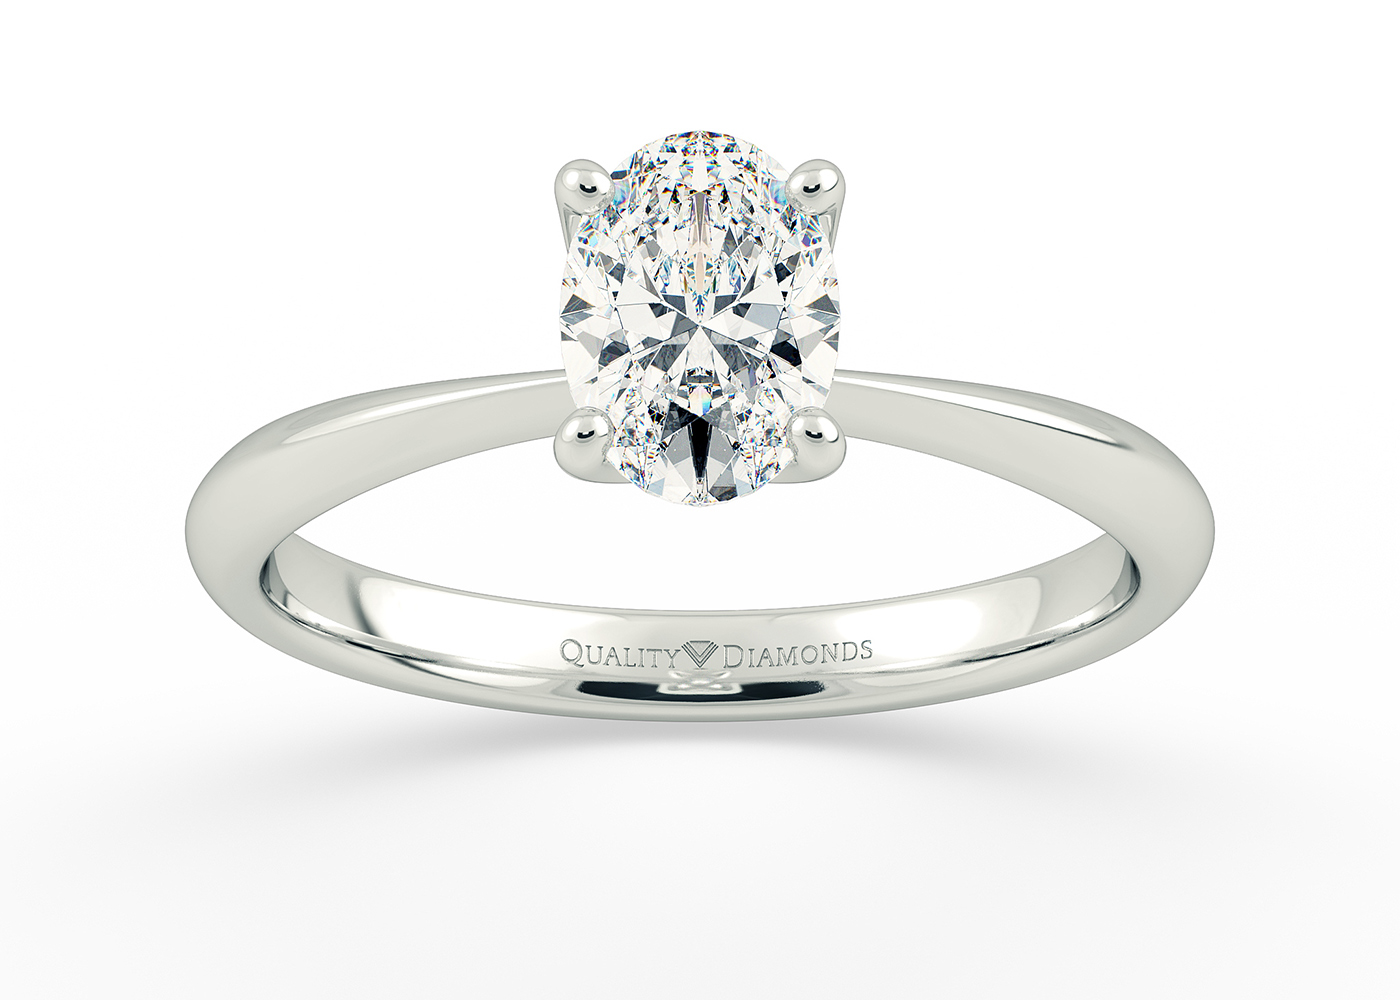 Two Carat Lab Grown Oval Solitaire Diamond Engagement Ring in Platinum 950